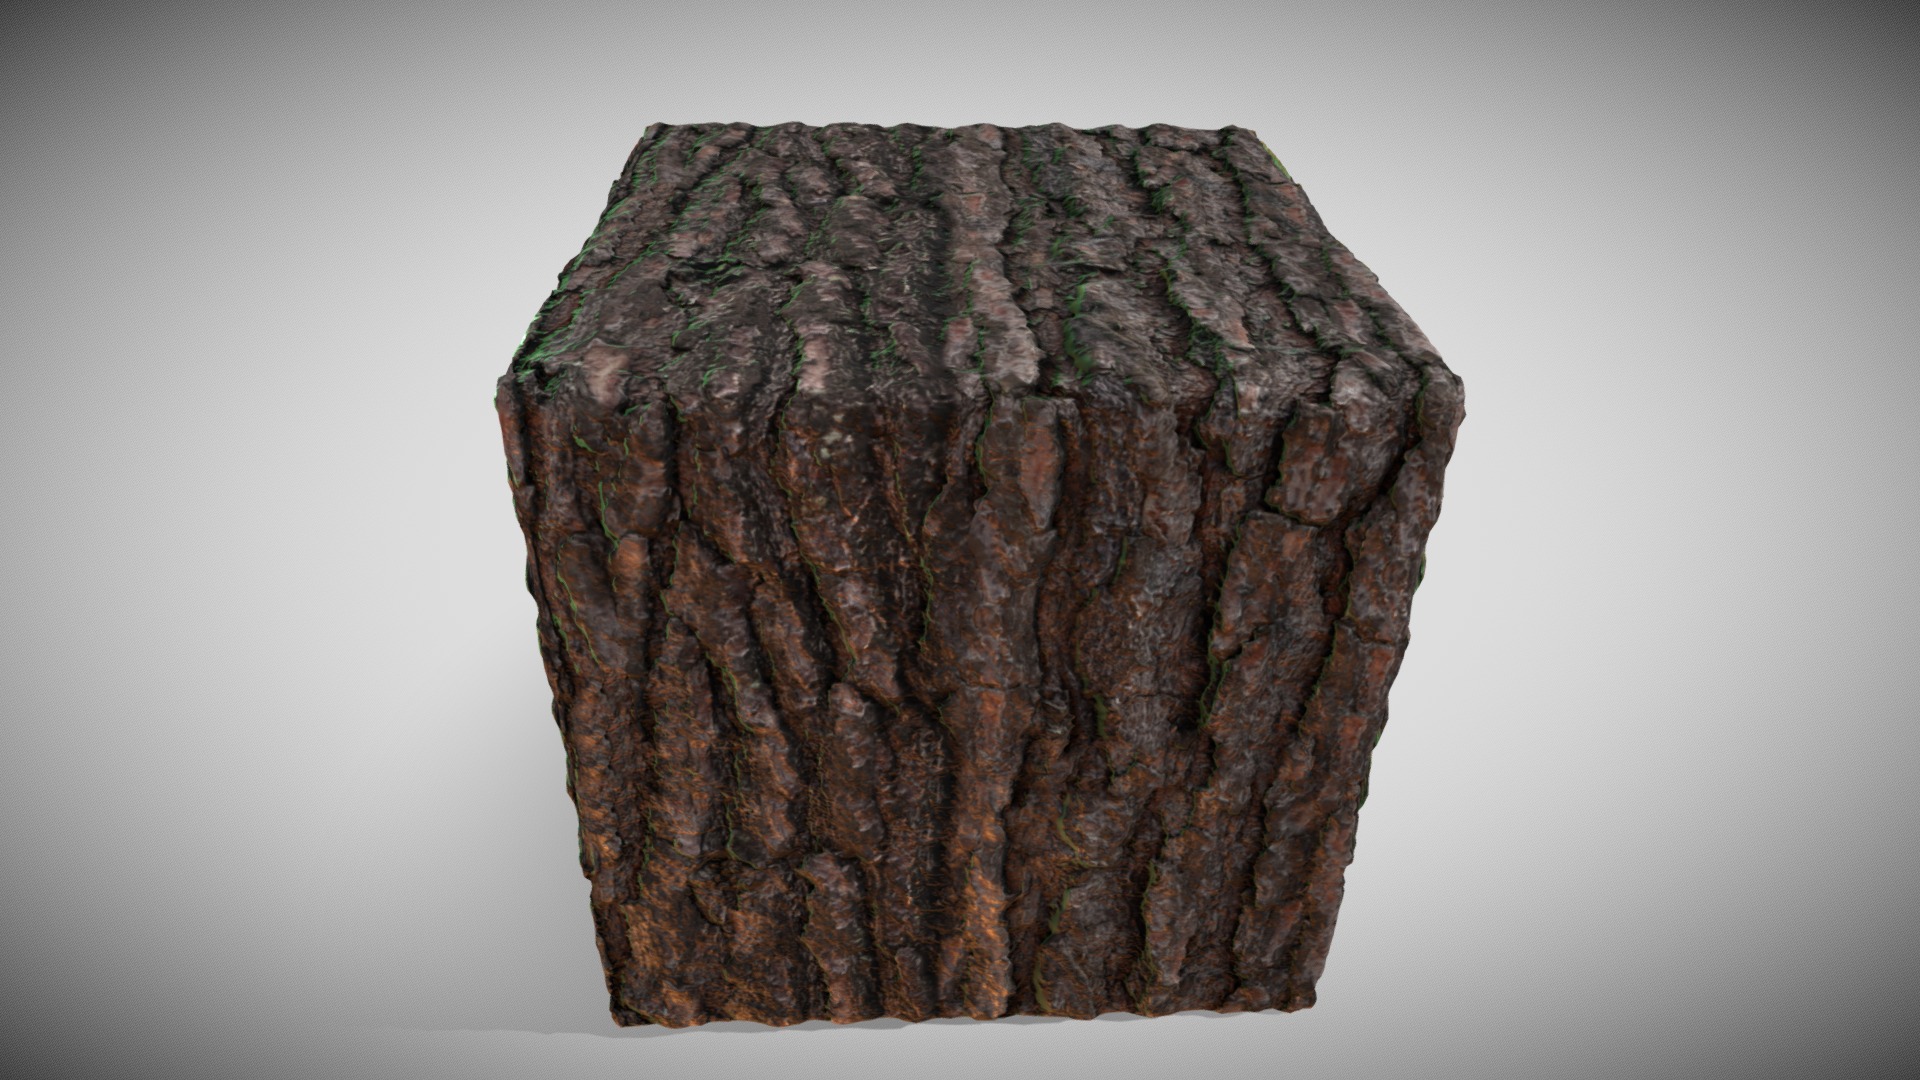 3D model Bark – PBR environment texture - This is a 3D model of the Bark - PBR environment texture. The 3D model is about a rock with a rough surface.